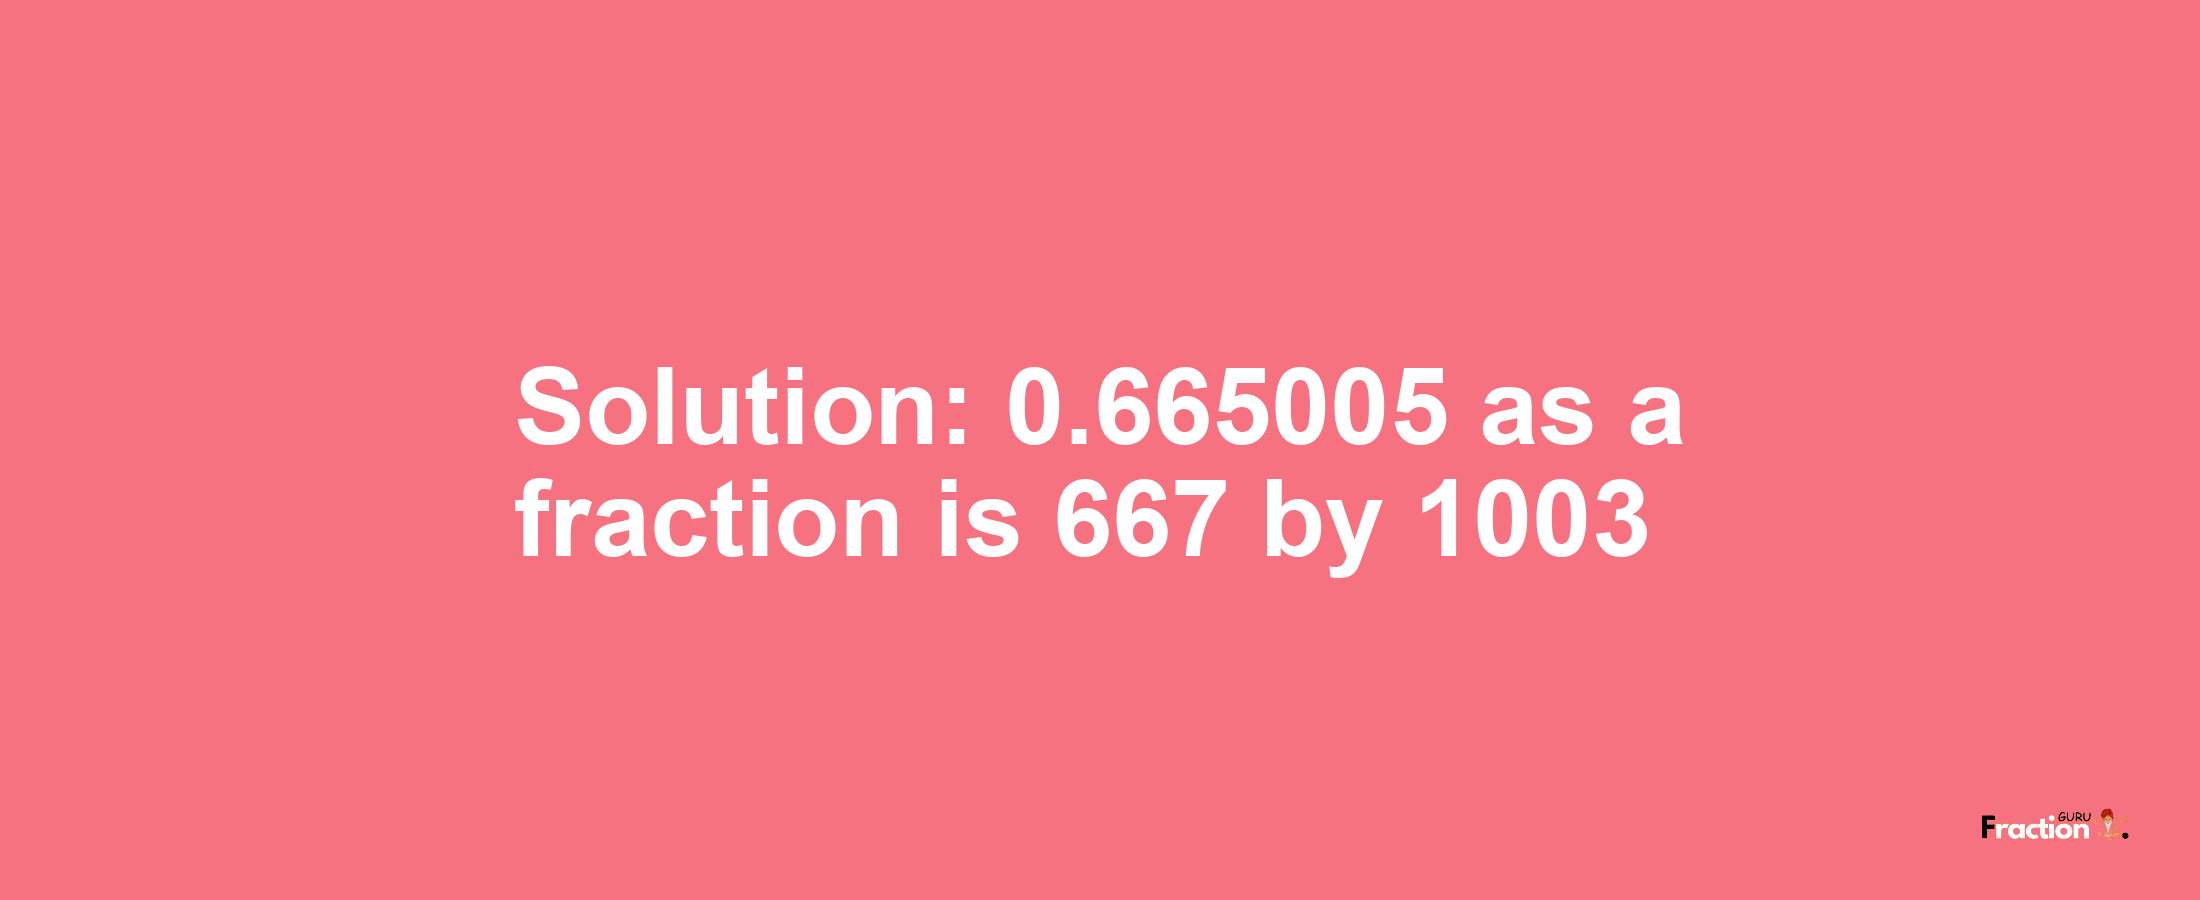 Solution:0.665005 as a fraction is 667/1003